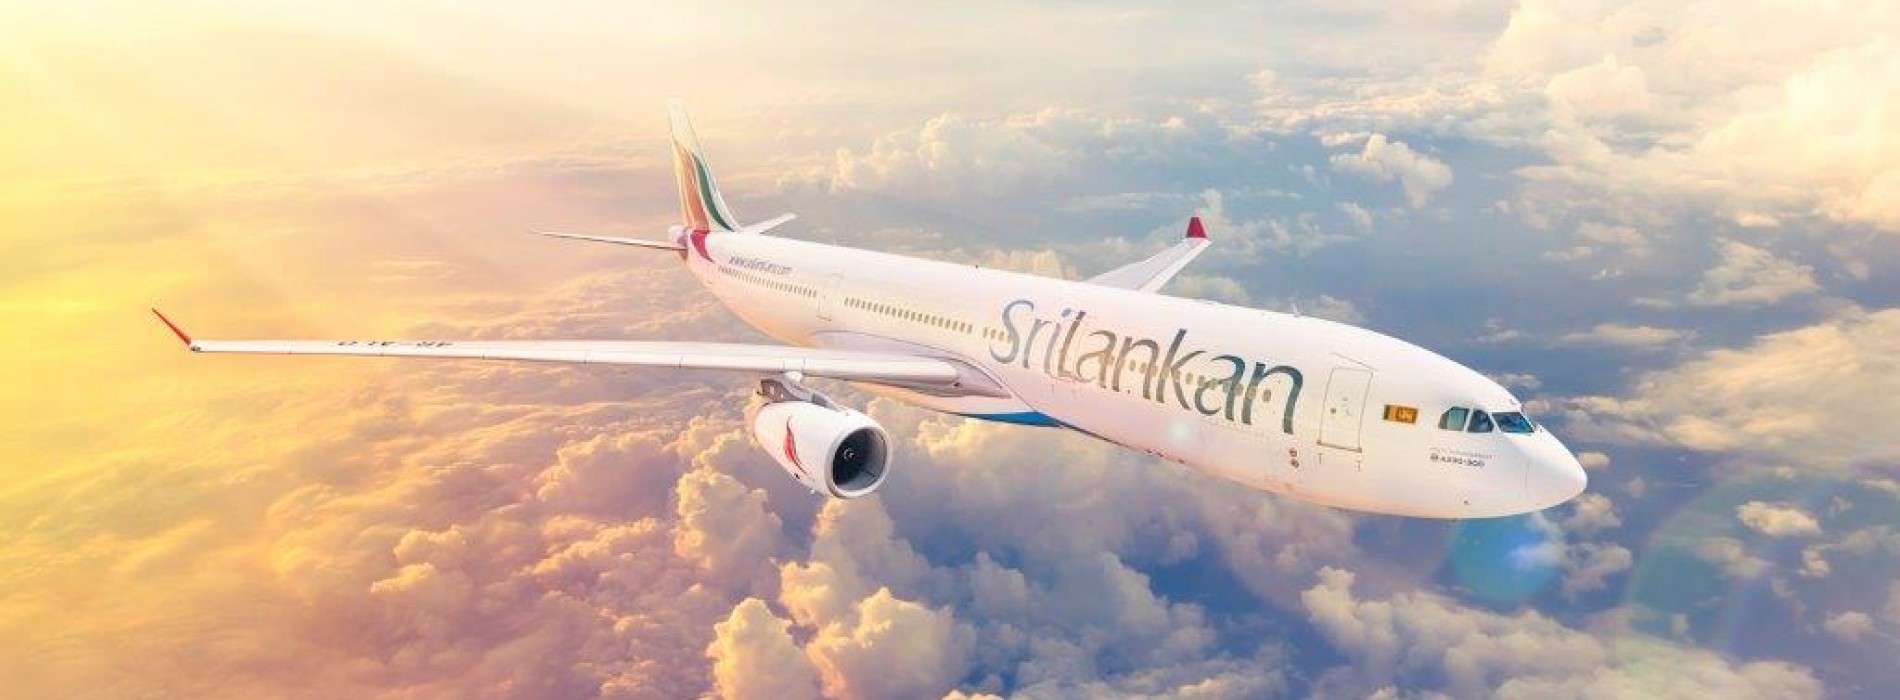 SriLankan Airlines Hosts Group of Leading Influencers and Actors from South India